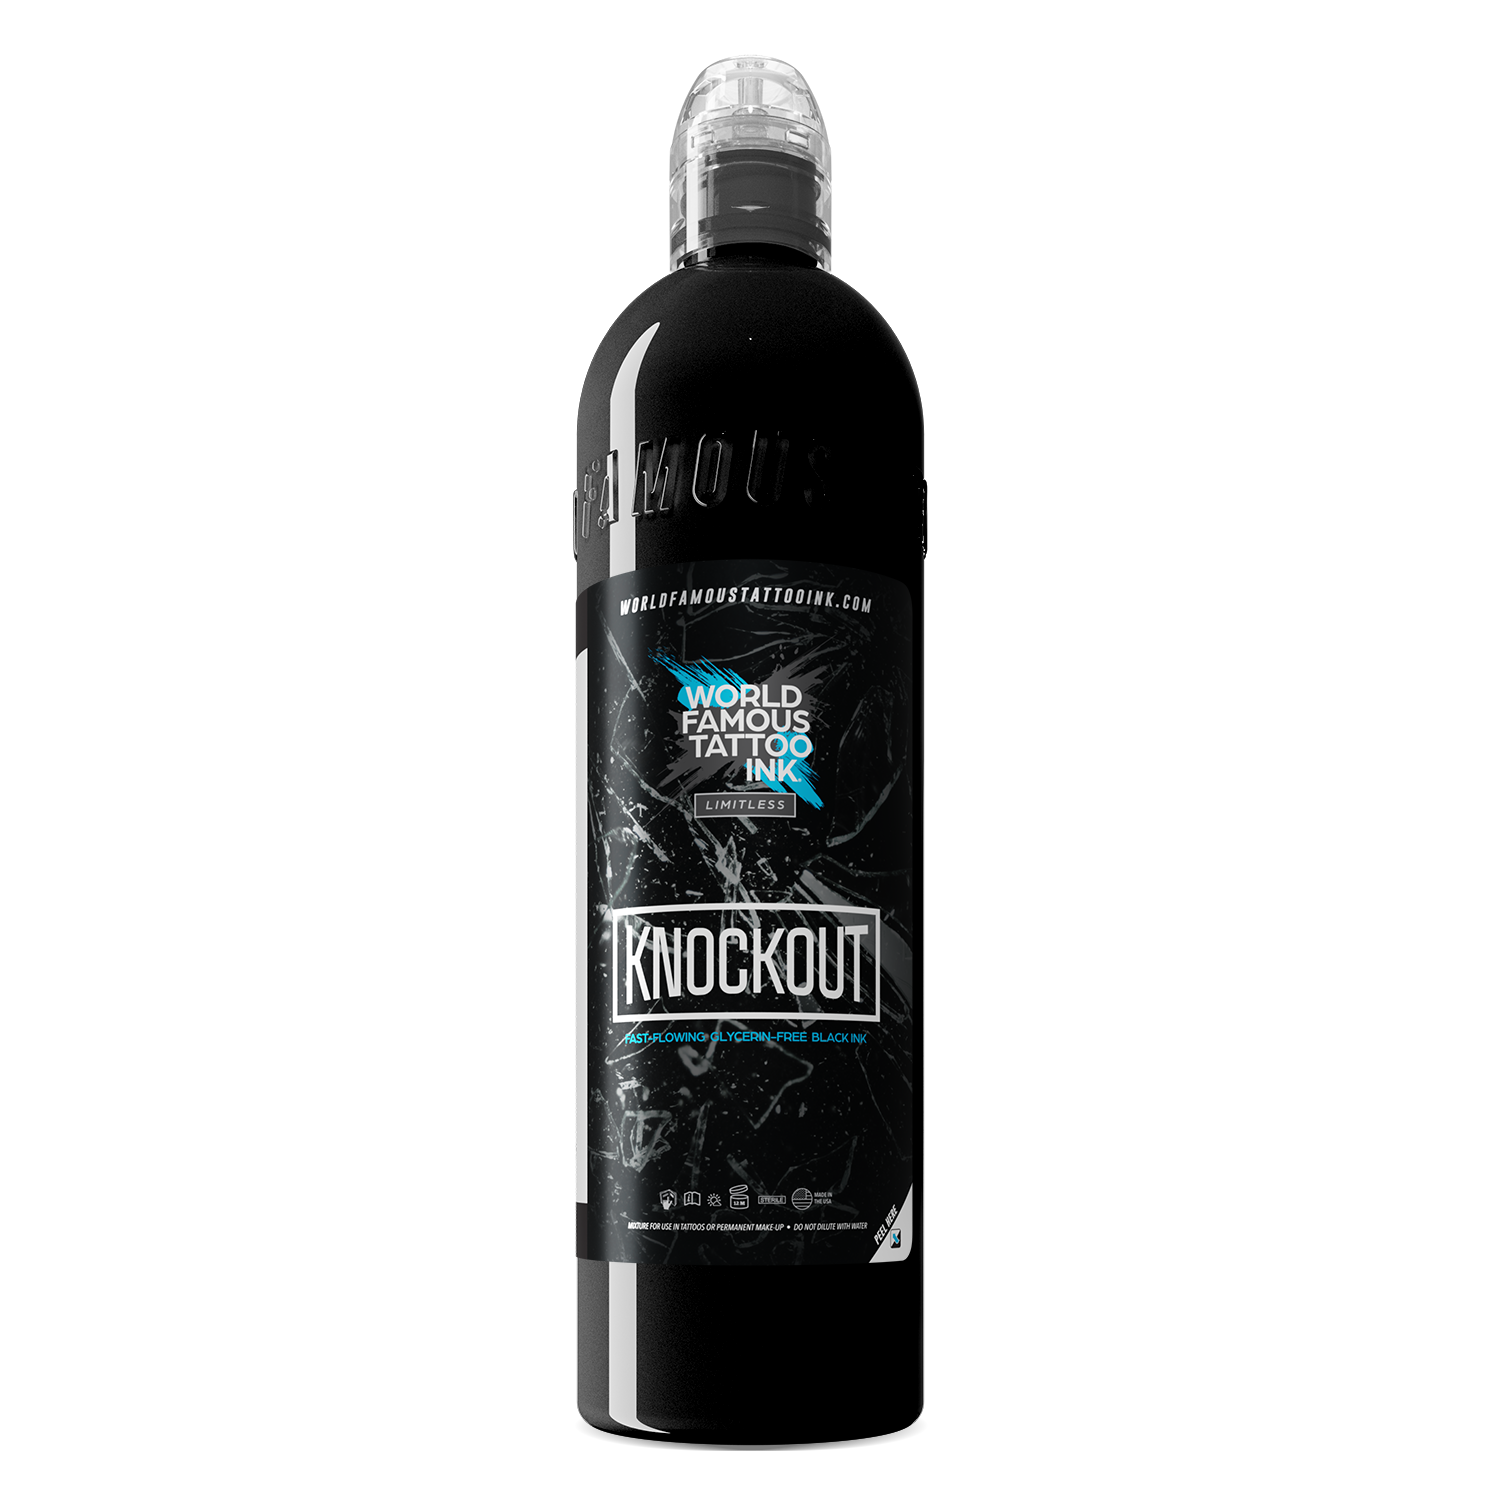 World Famous - Limitless Tattoo Ink - Knockout - 240 ml